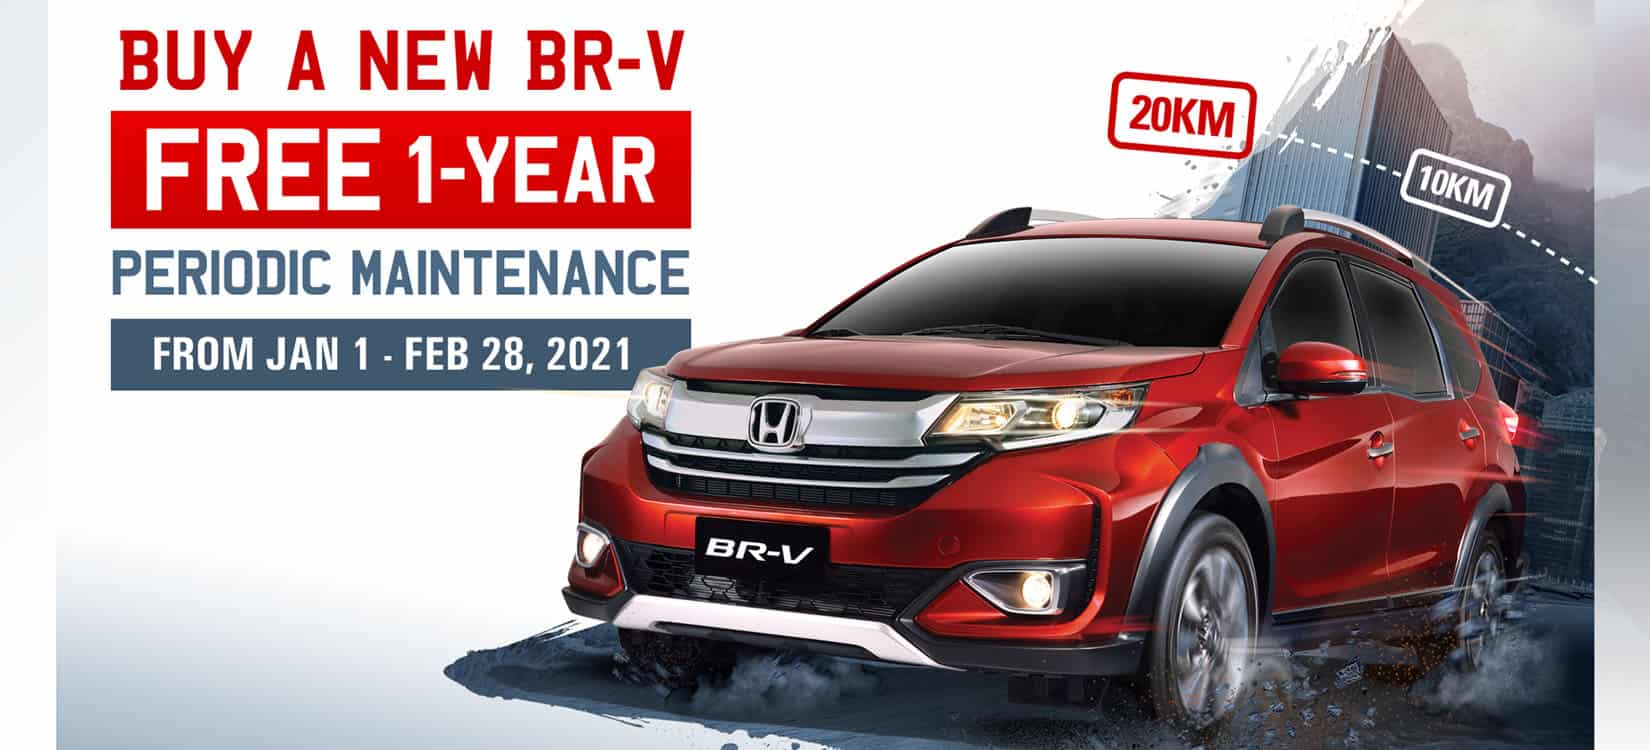 Honda offers free one year periodic maintenance,  cash discount for BR-V customers